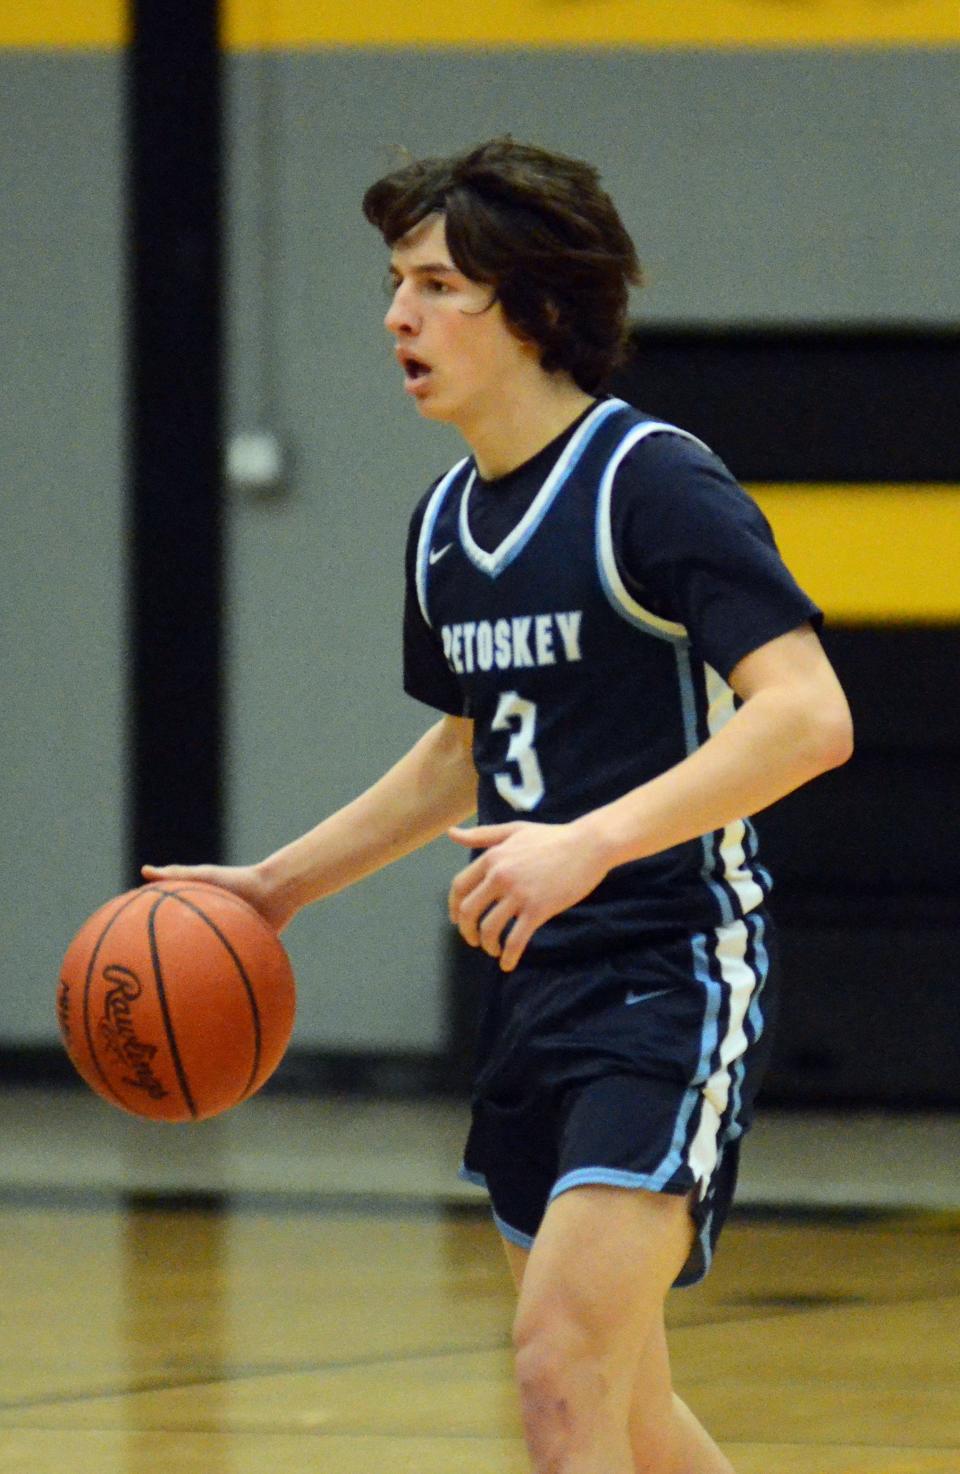 Petoskey's Evan Rindfusz finished up a two-year varsity career as a tough on-ball defender.